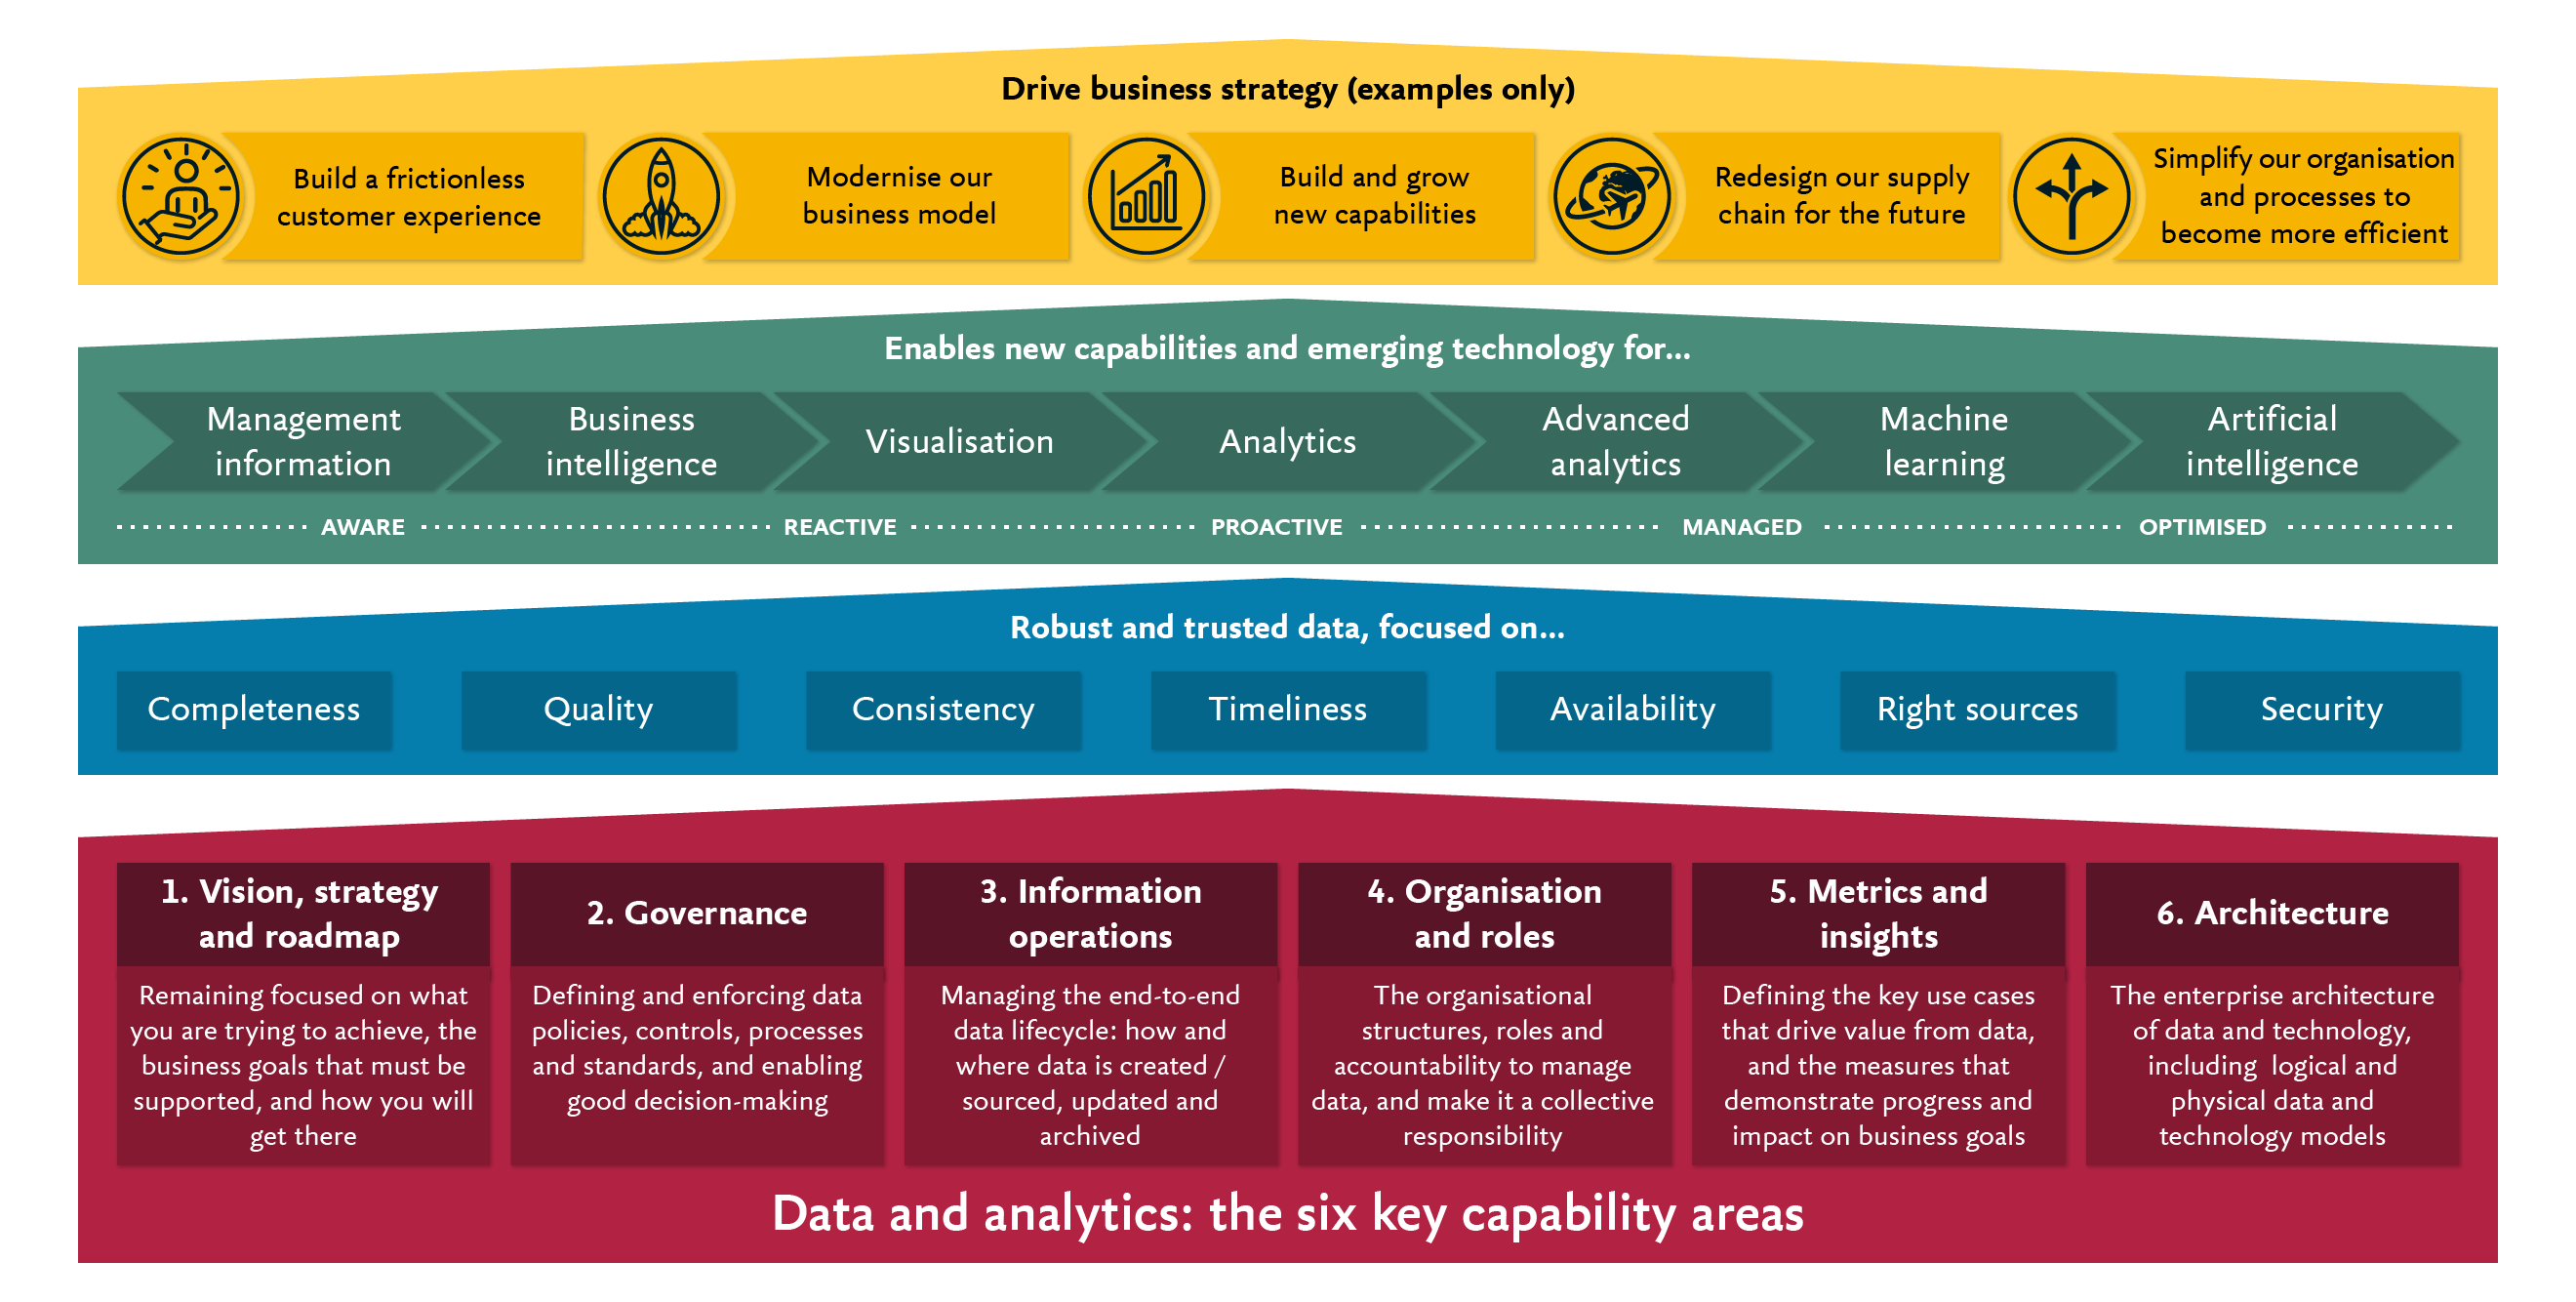 UK-Data-and-analytics-the-six-key-capability-areas@2x.png